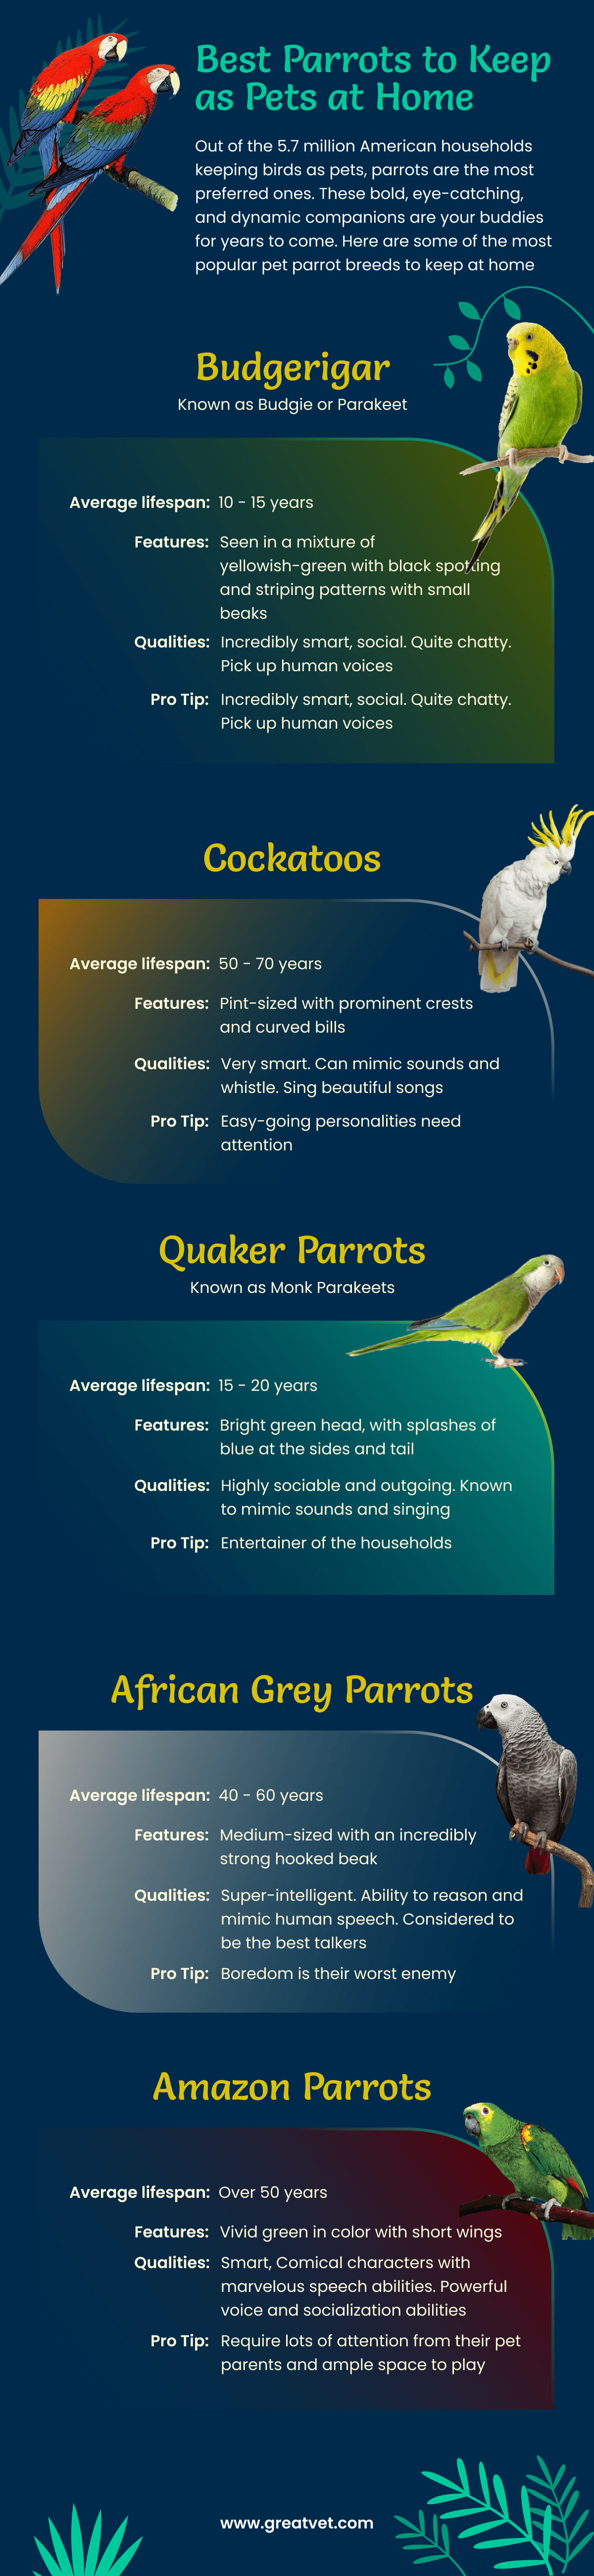 Best Parrots to Keep as Pets at Home [Infographic] - GreatVet